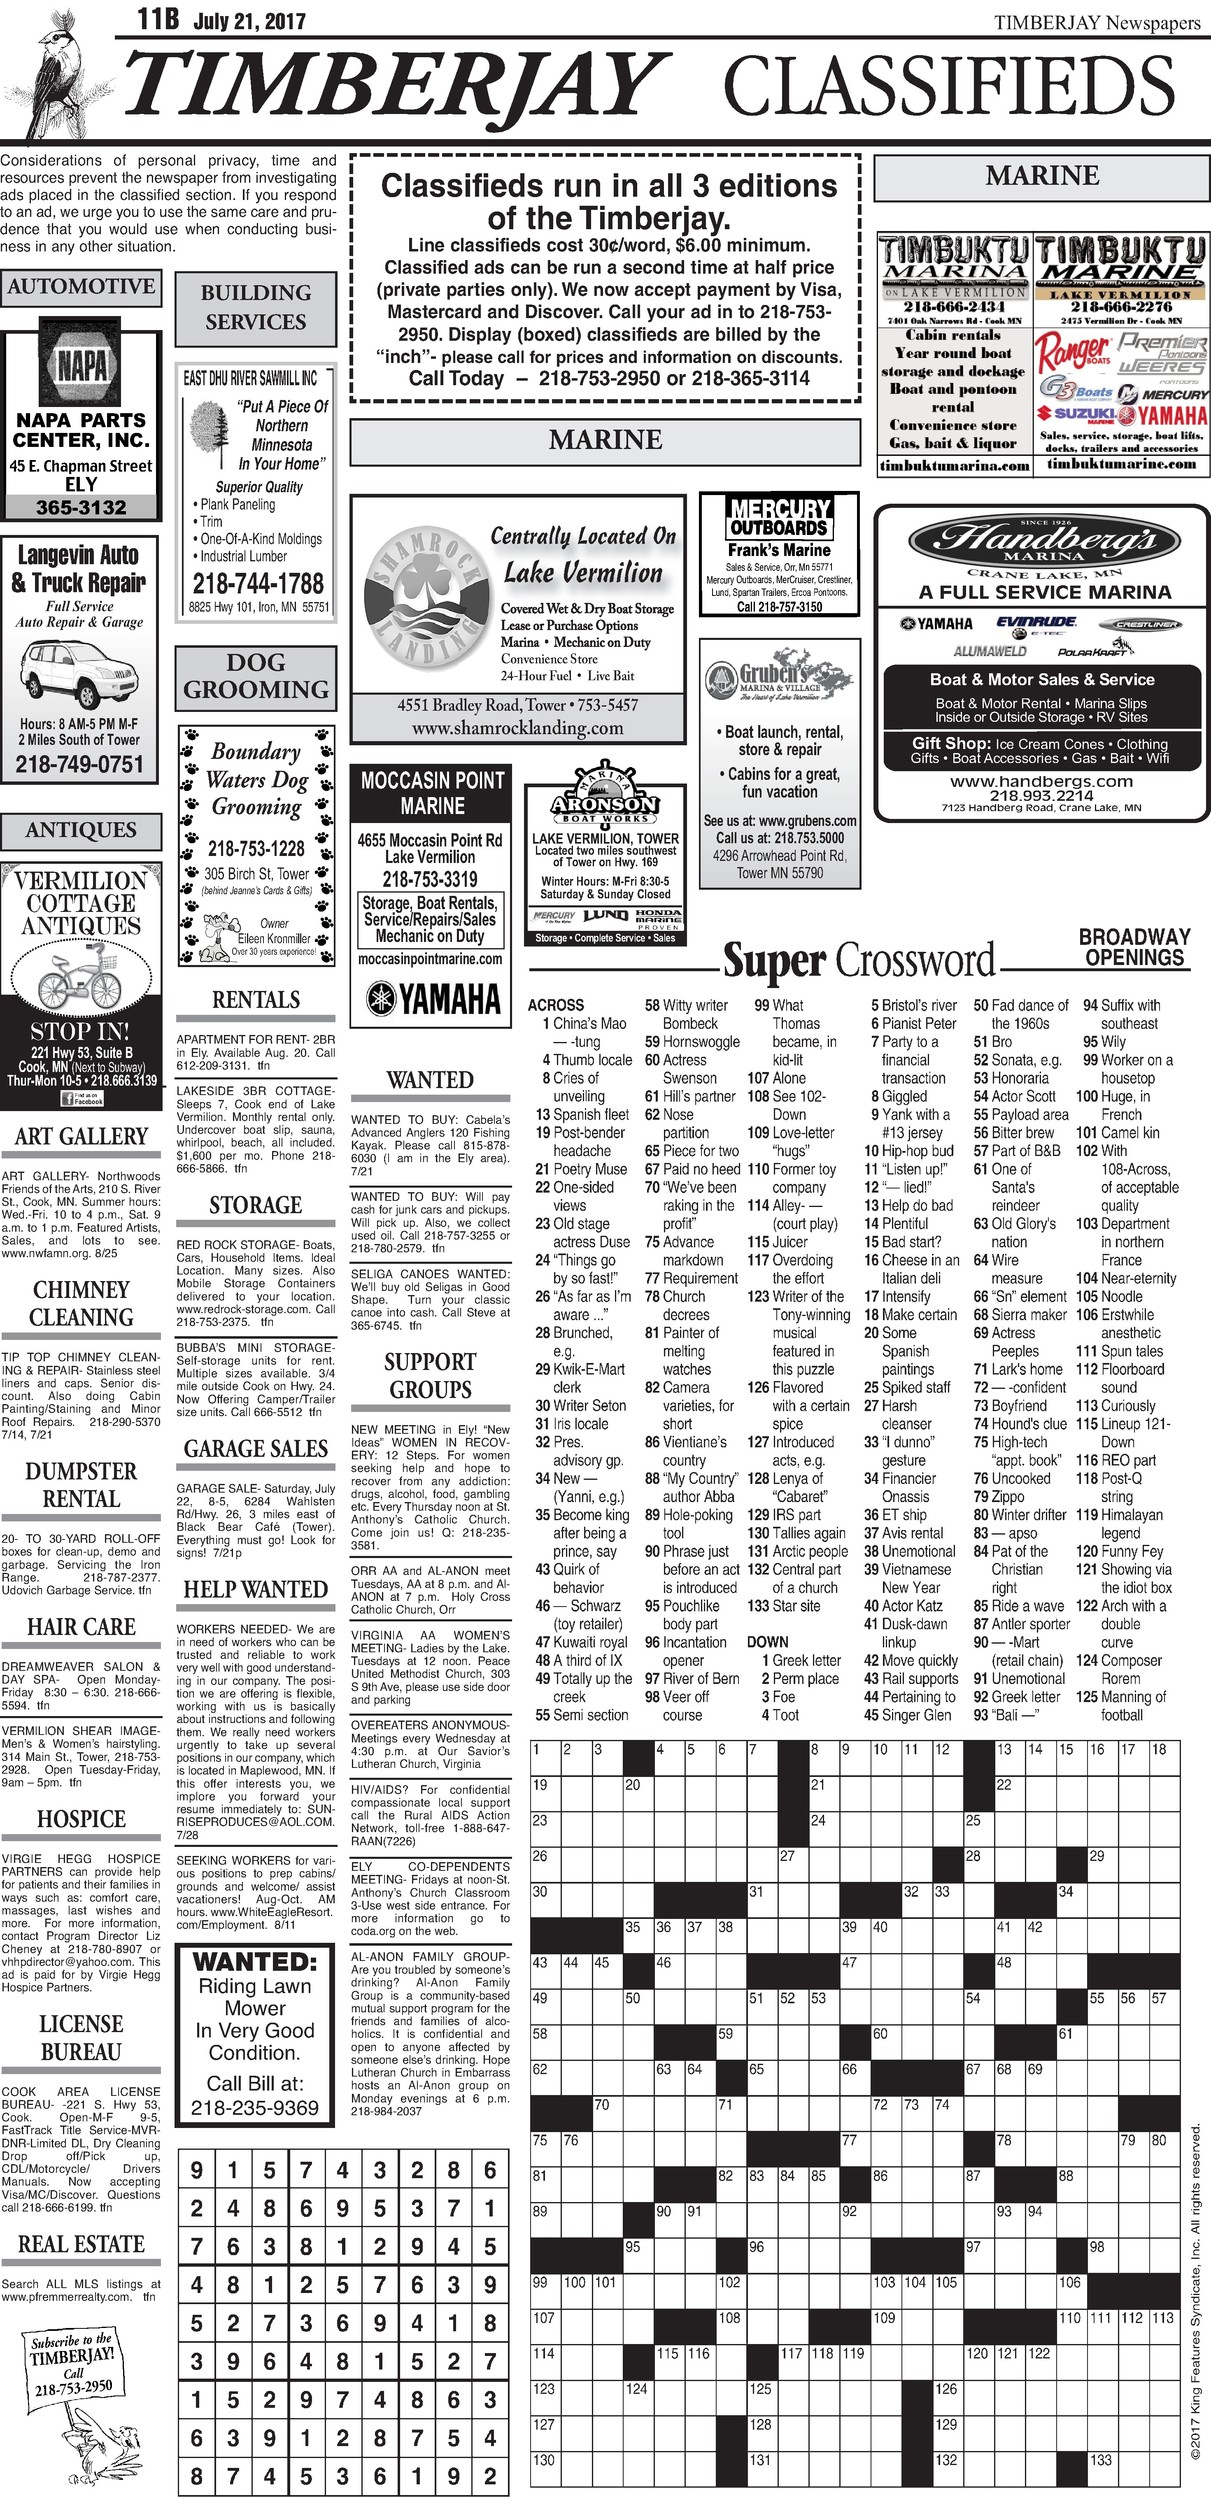 Click here for the legal notices and classifieds from page 11B